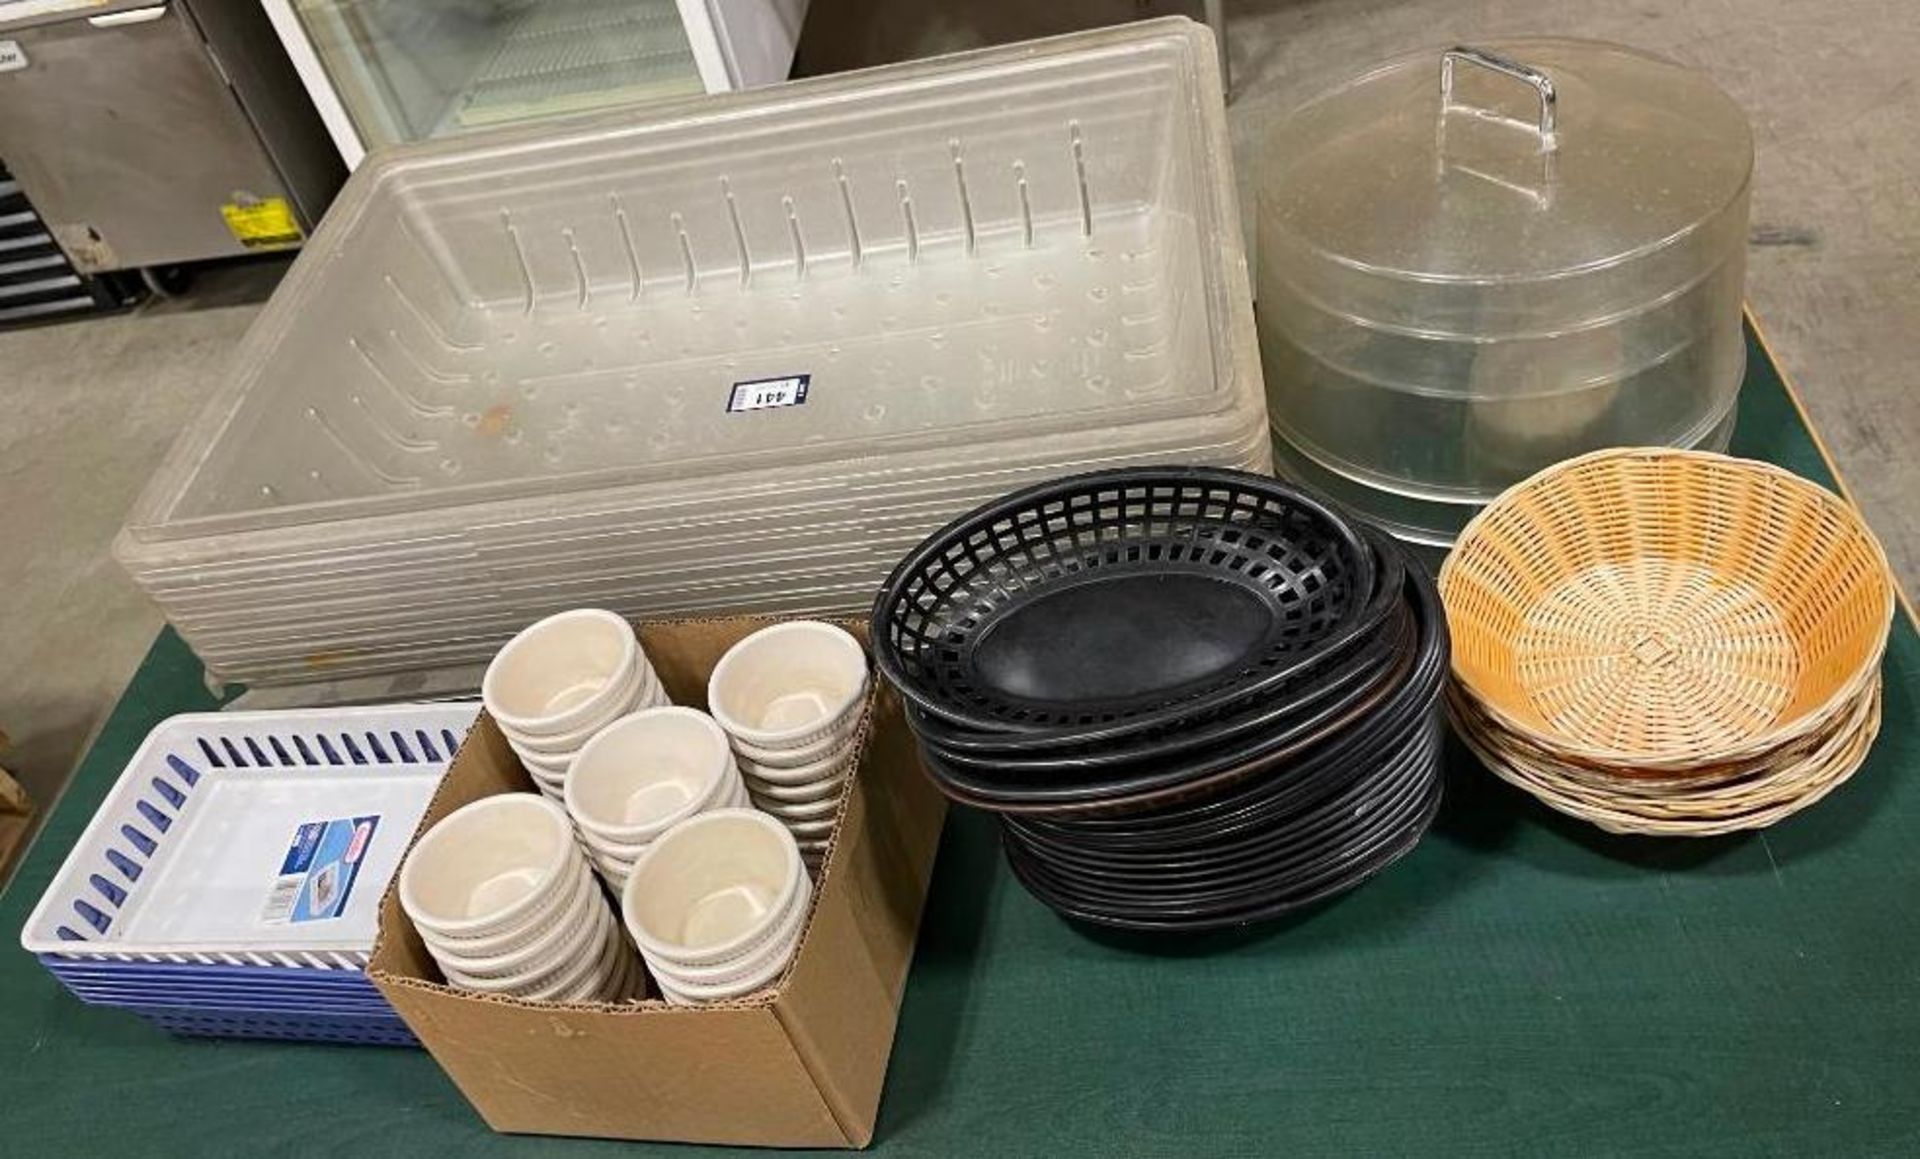 (8) POLYCARBONATE FULL SIZE DRAIN INSERTS, FOOD BASKETS, RAMEKINS & FOOD COVERS - Image 8 of 12